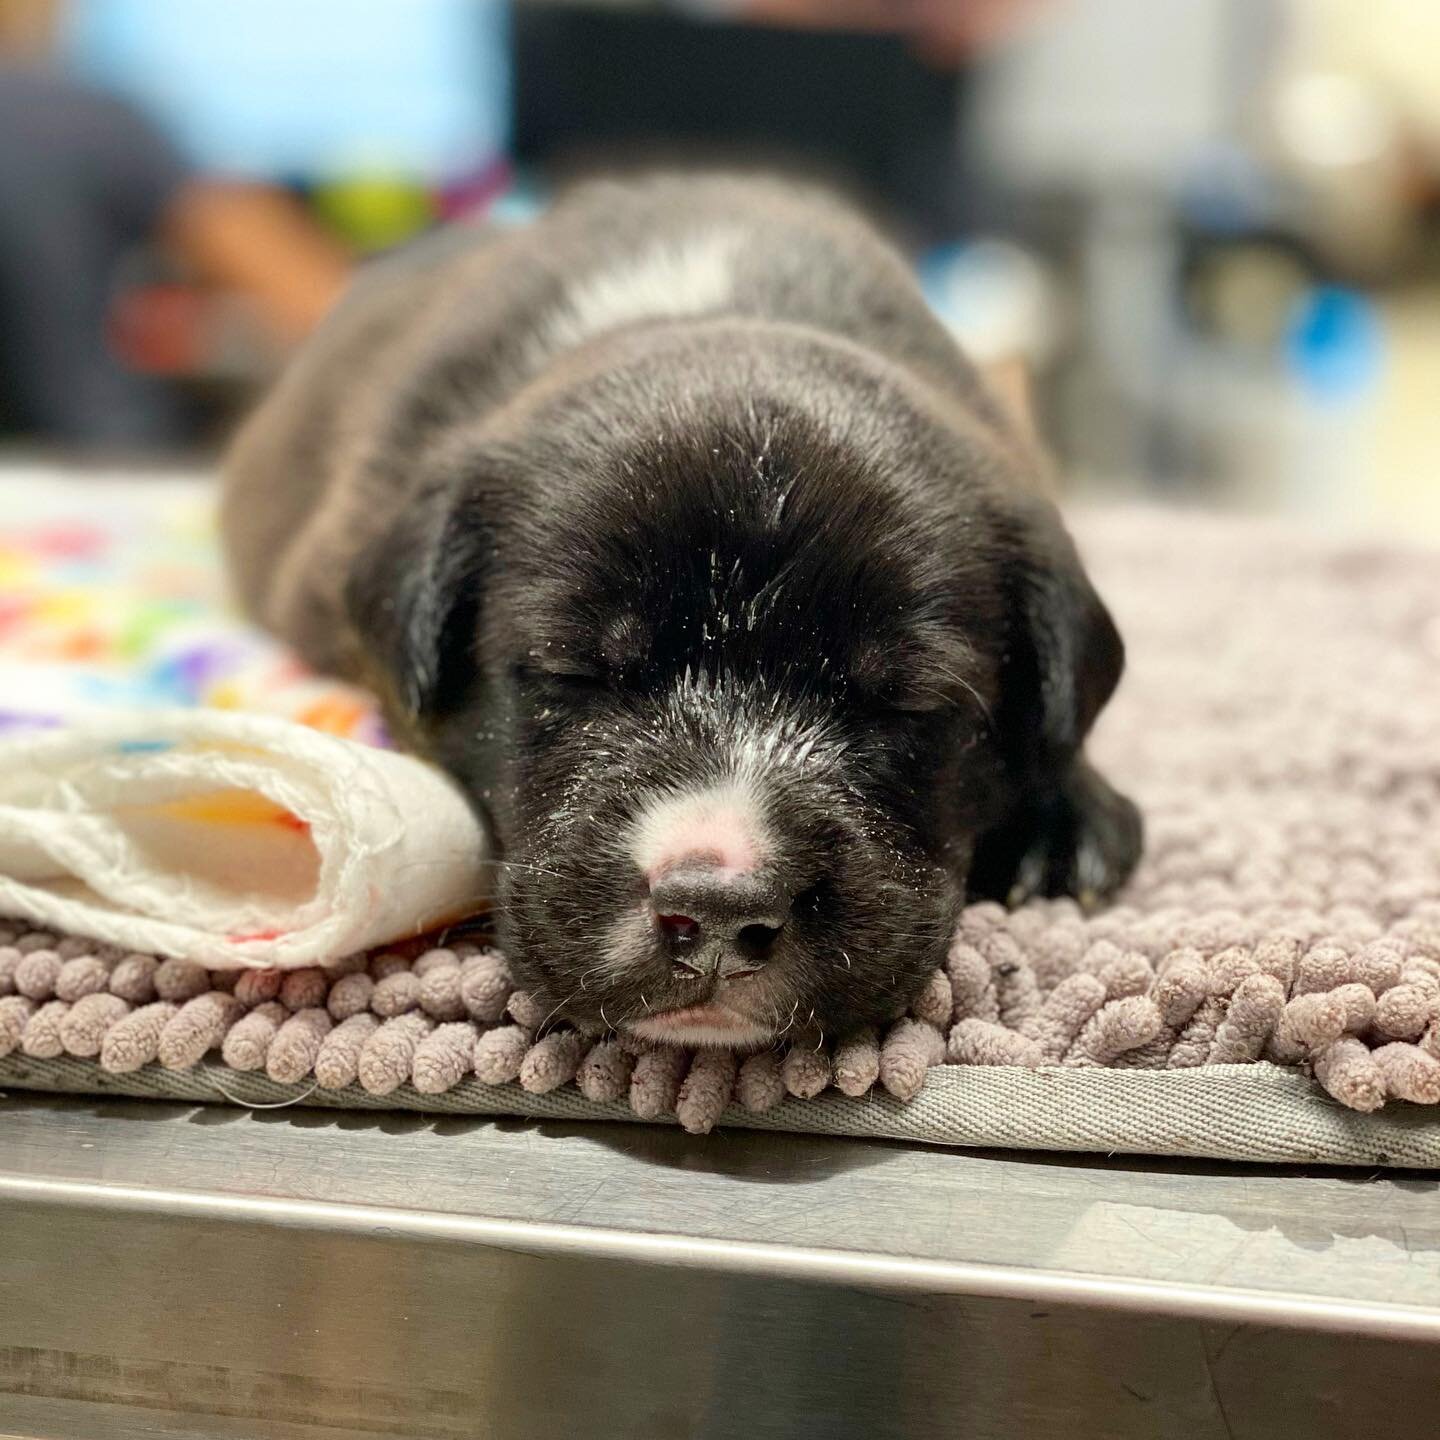 Nova needs your help! 🥺 Nova was born in our rescue 3 weeks ago. He is one of Mama Roxie&rsquo;s pups (if you&rsquo;ve been following us you know who she is!) 

Unfortunately, Nova became very ill, very quickly and has been admitted into the emergen